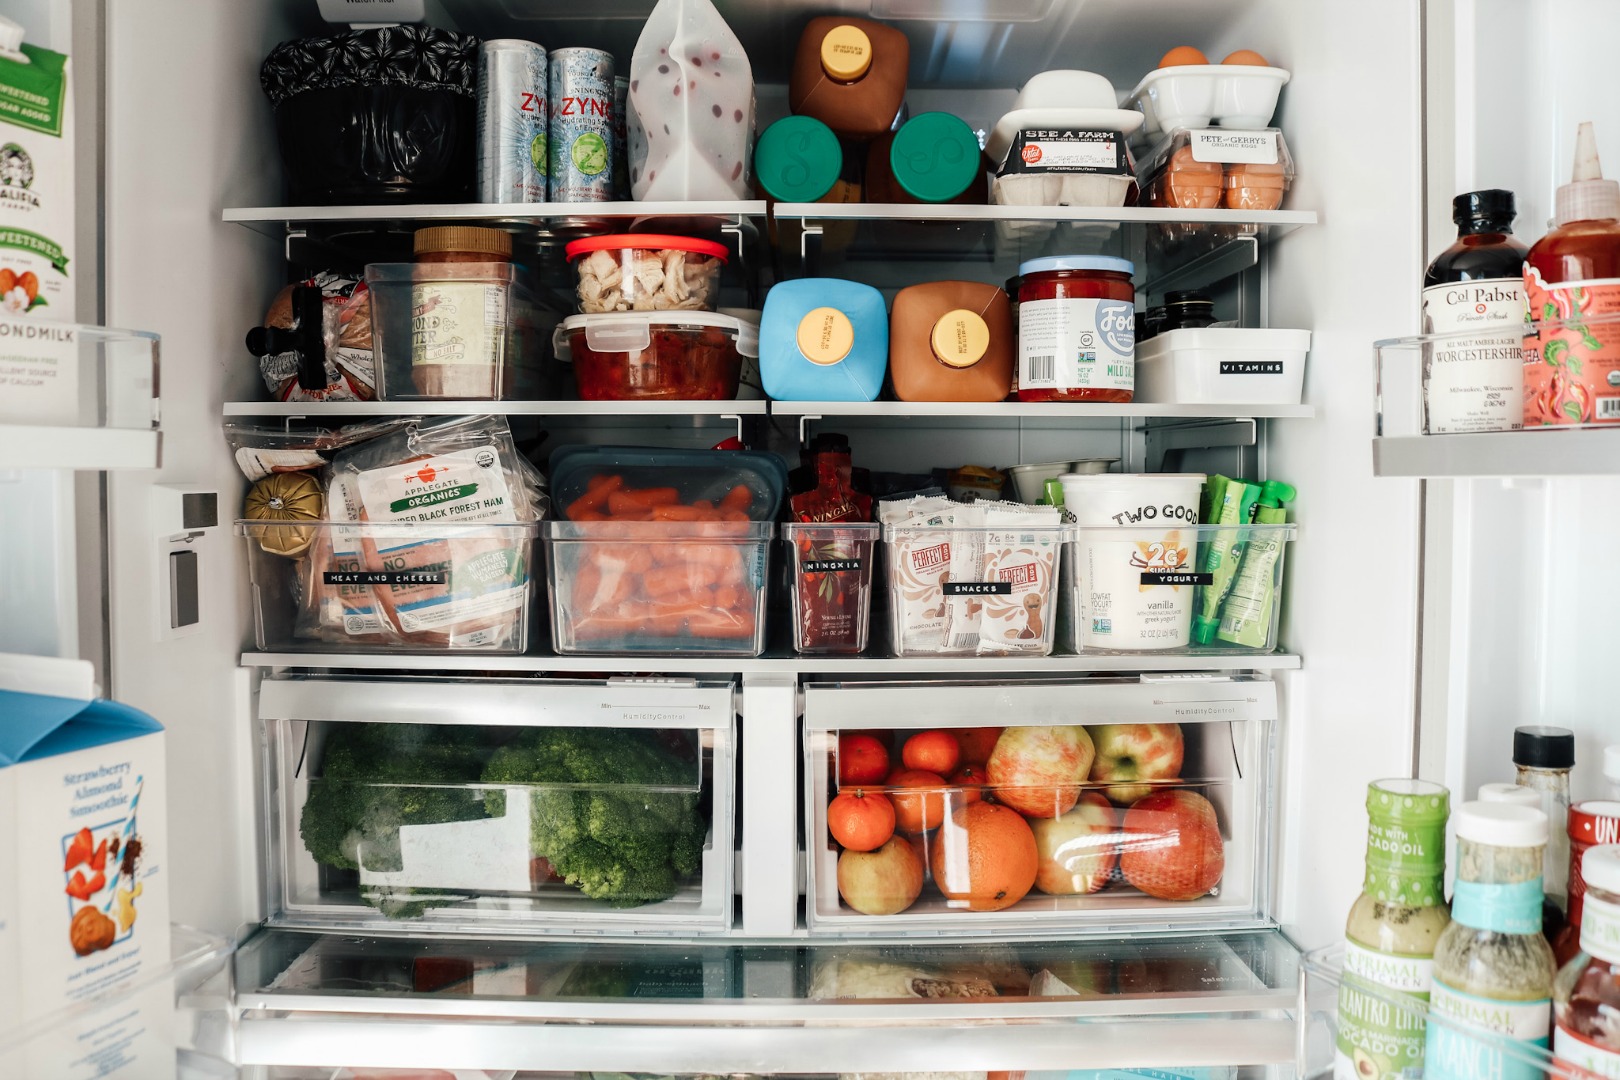 Inside our Fridge and Favorite things to Organize Fridge